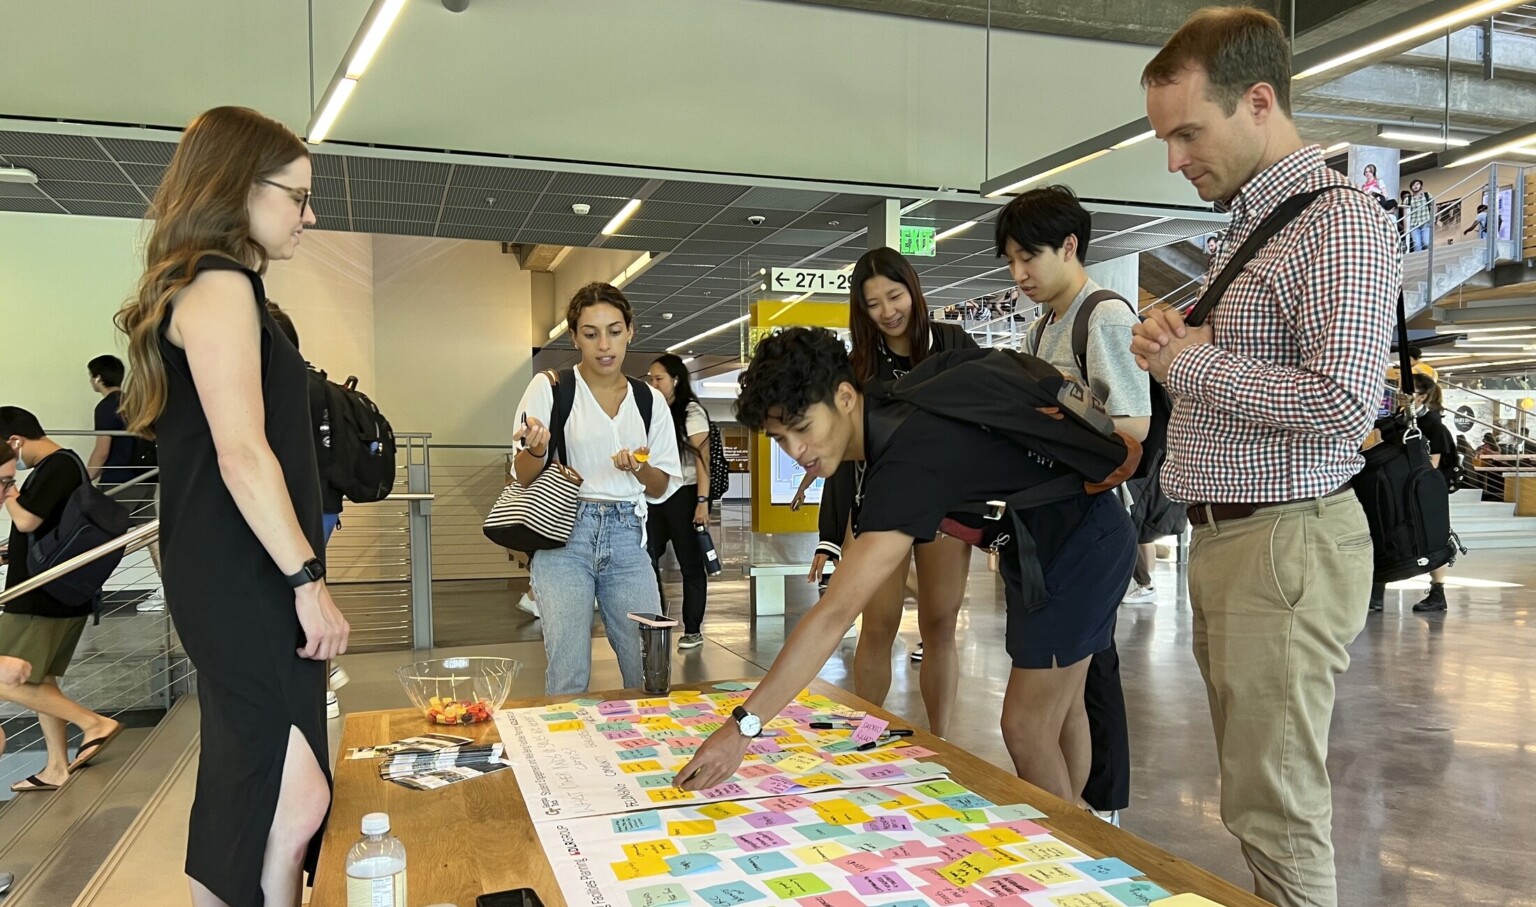 Students at Society for College and University Planning’s collaborate on student well-being session by utilizing colorful post it notes to organize the project